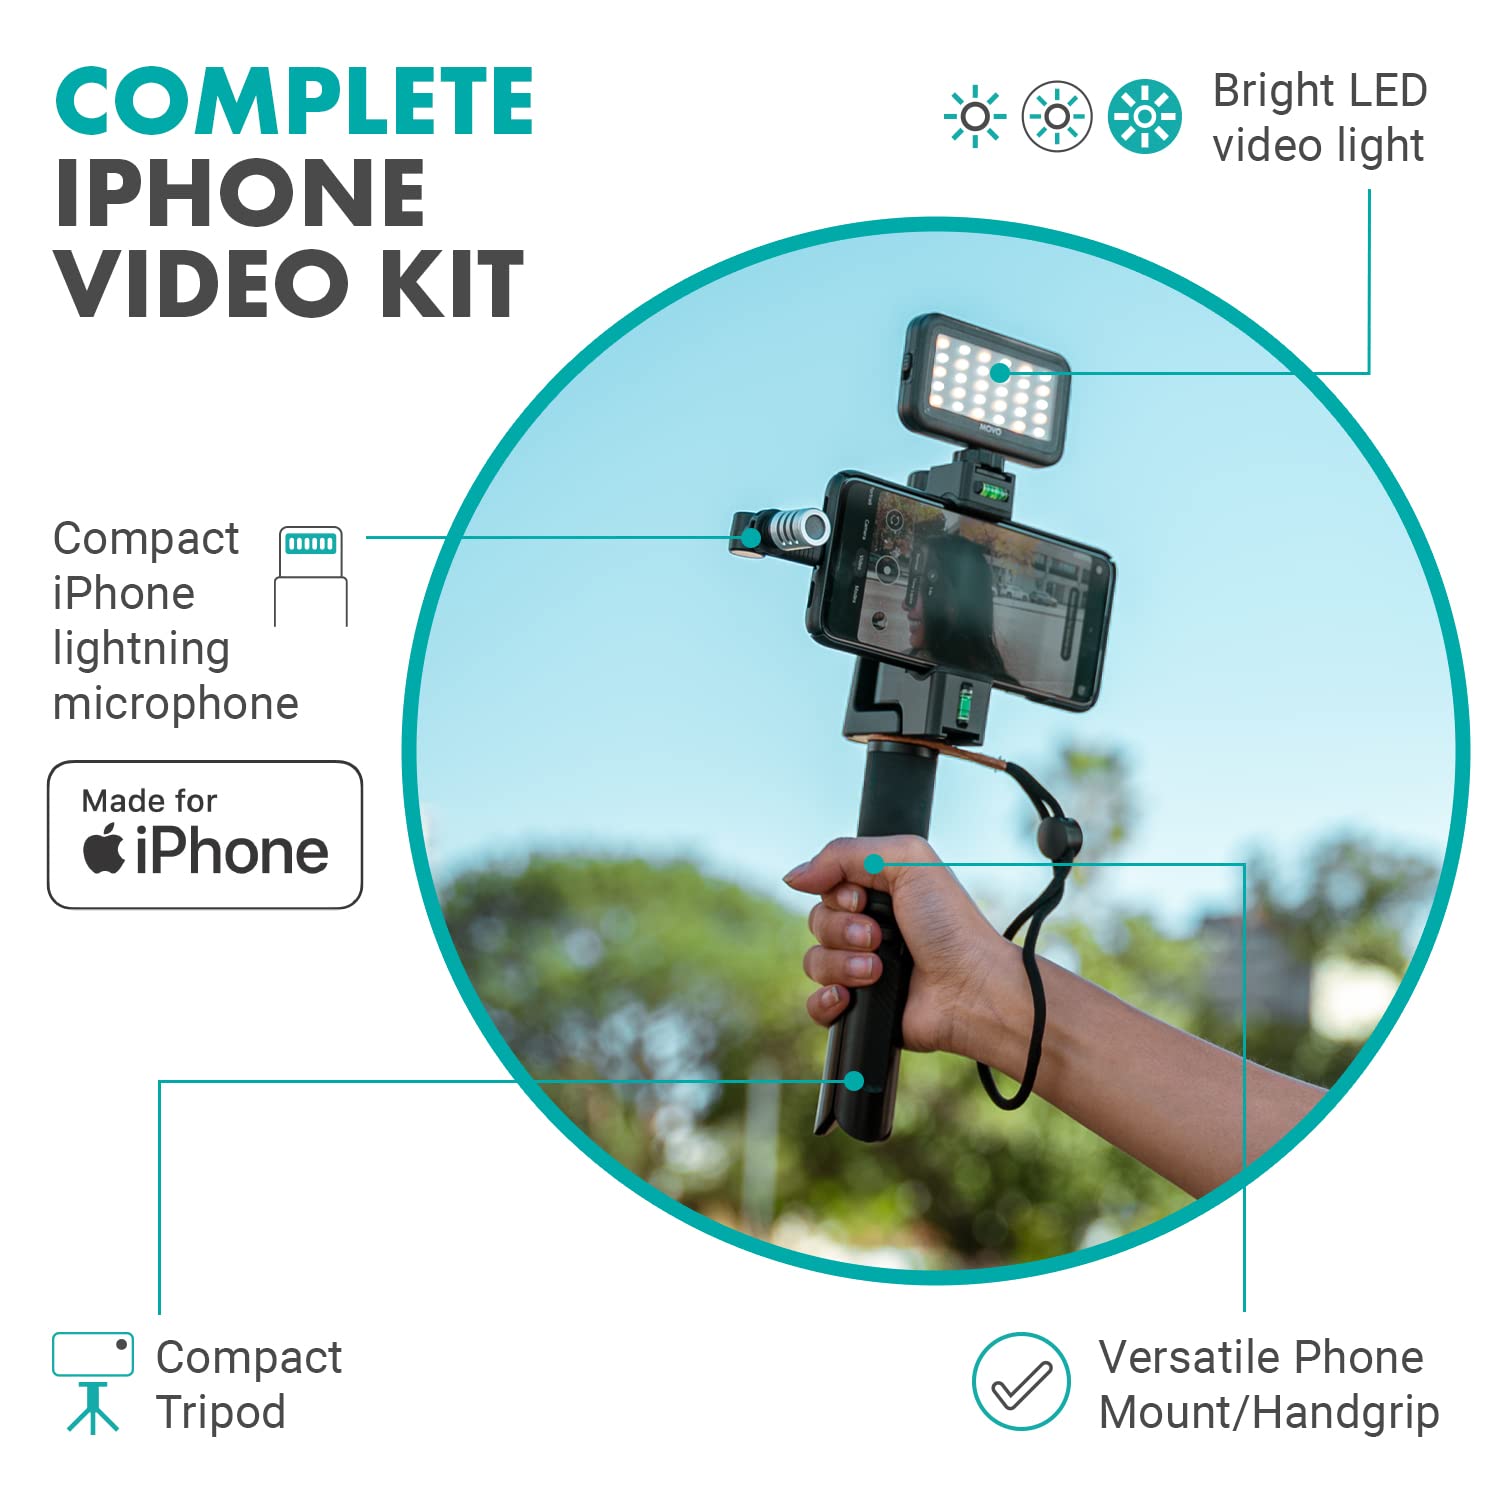 Movo iVlogSK Starter Kit for Content Creators - Smartphone Video Vlogging Kit for iPhone - Includes Lightning Microphone, LED Video Light, Phone Holder, Grip, and Mini Tripod  - Like New